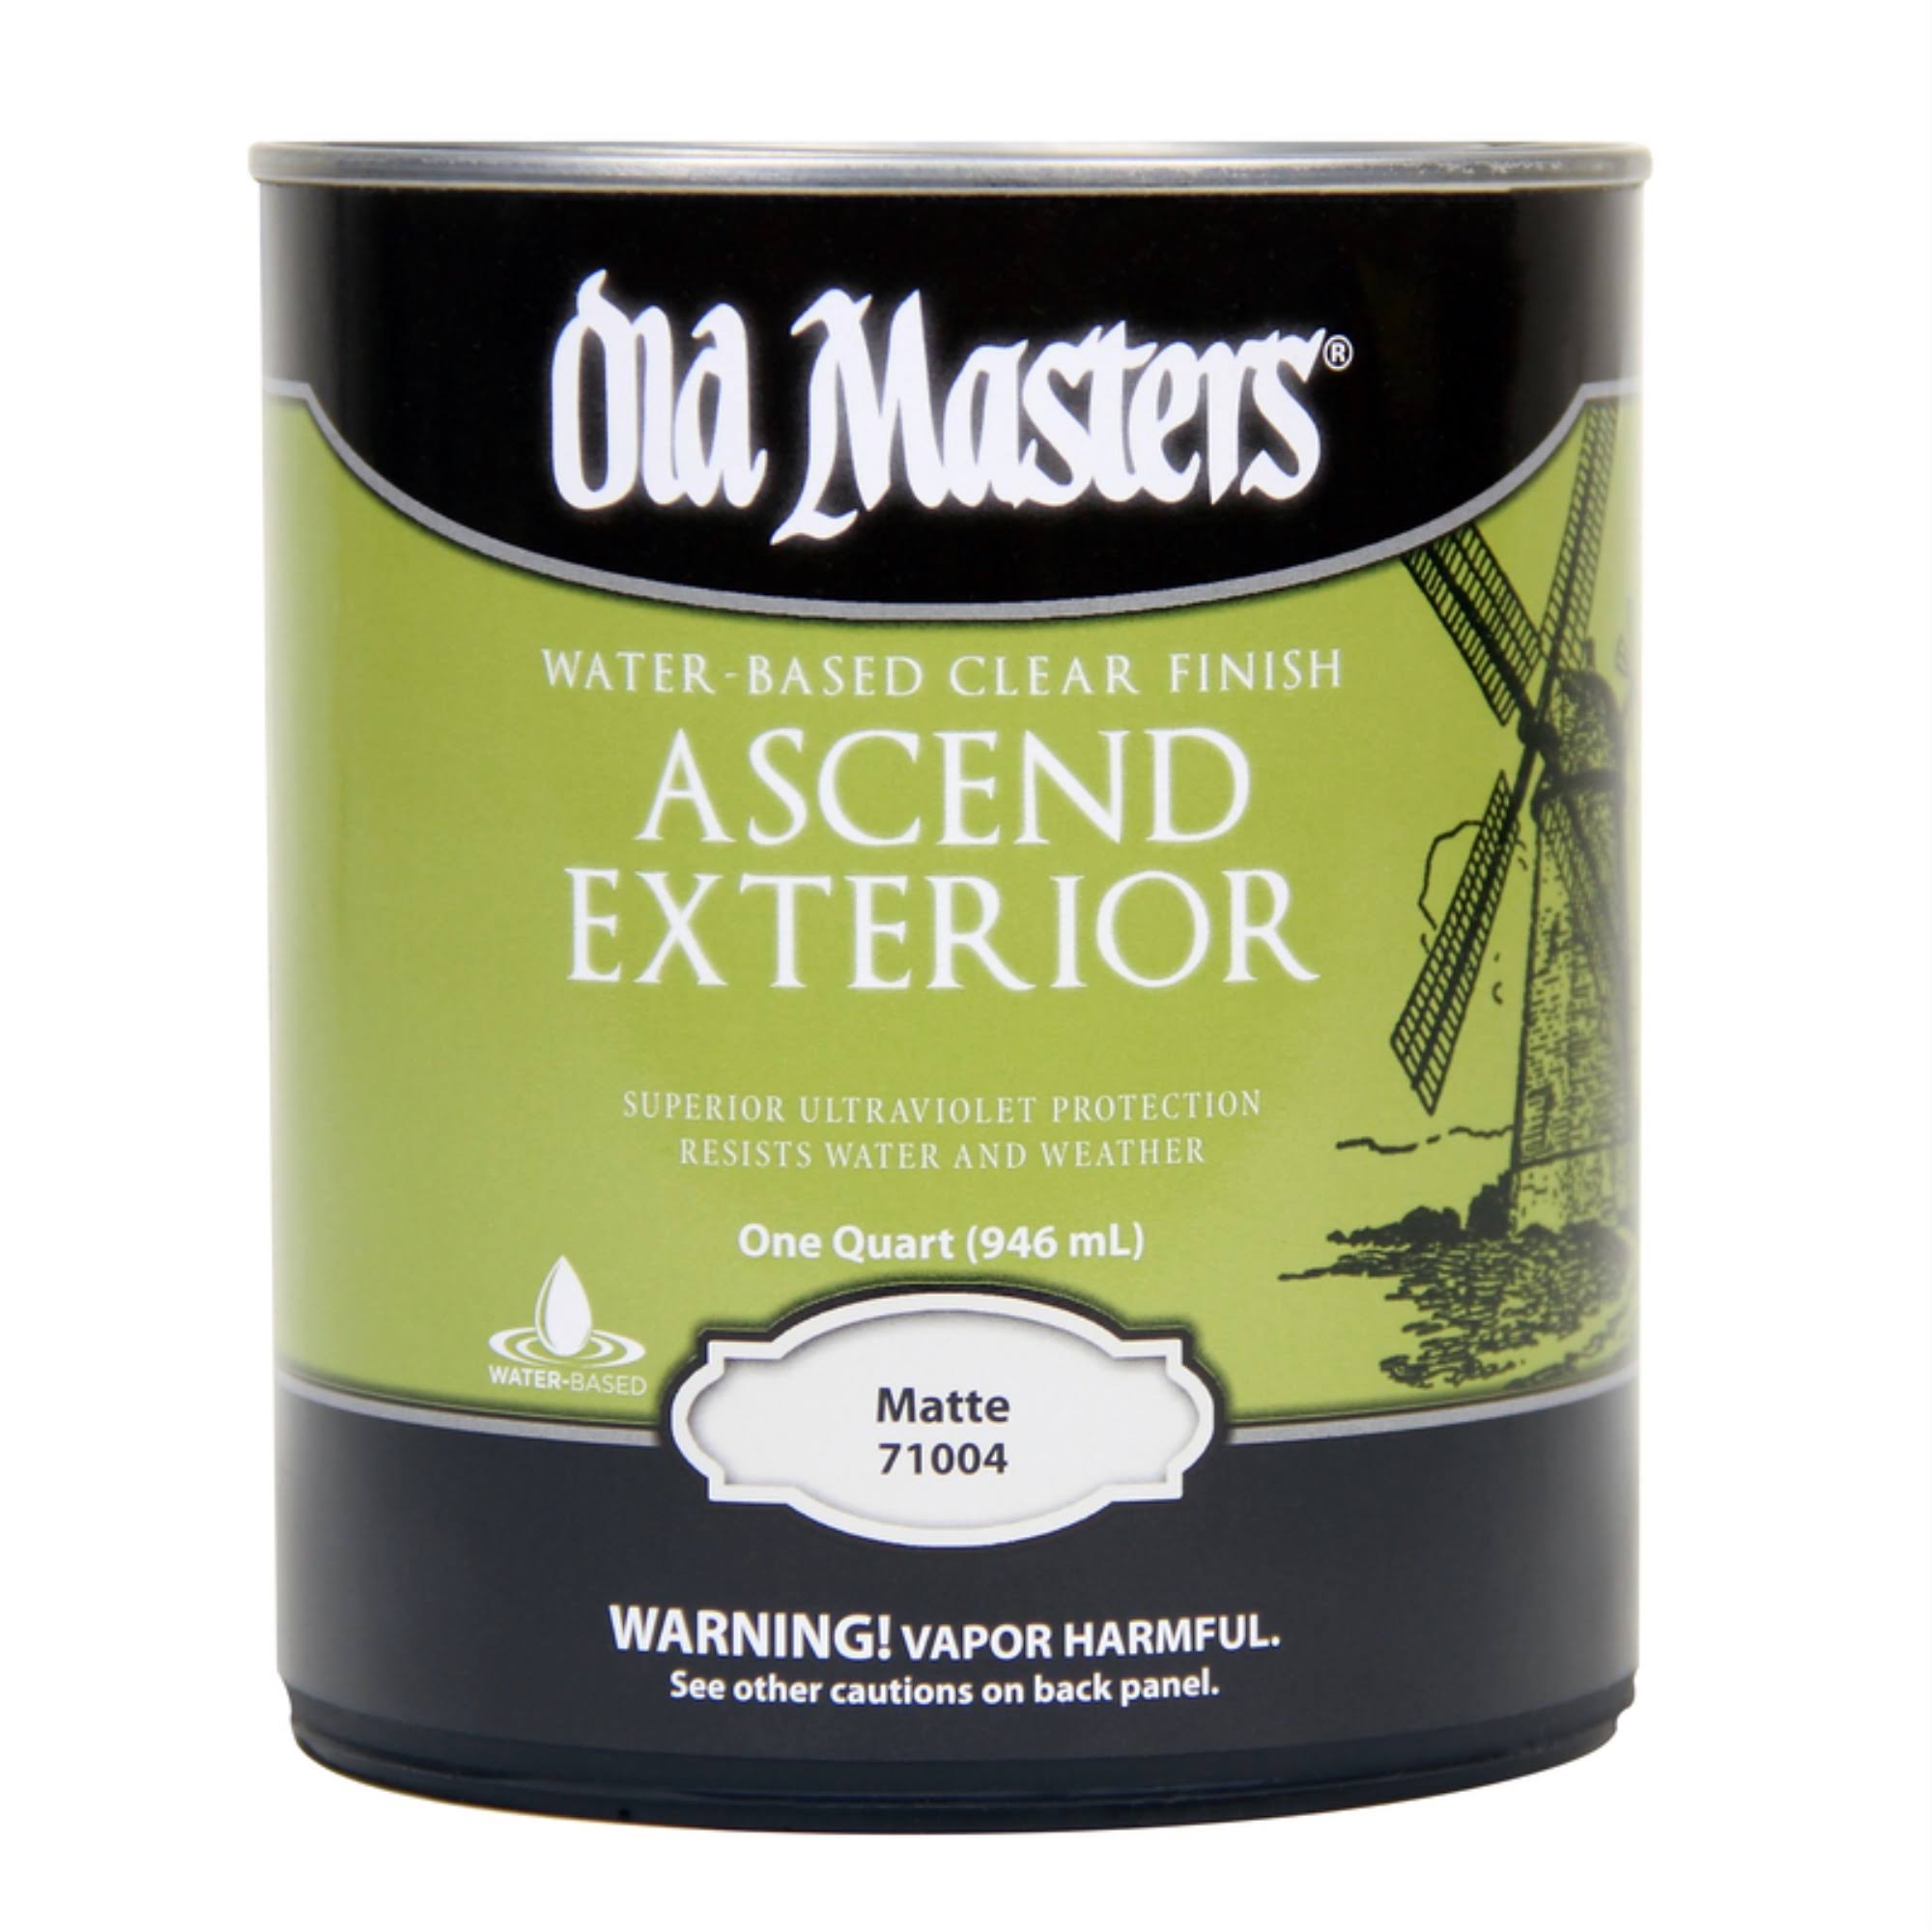 1 qt Old Masters 71004 Clear Ascend Exterior Water-Based Finish, Matte